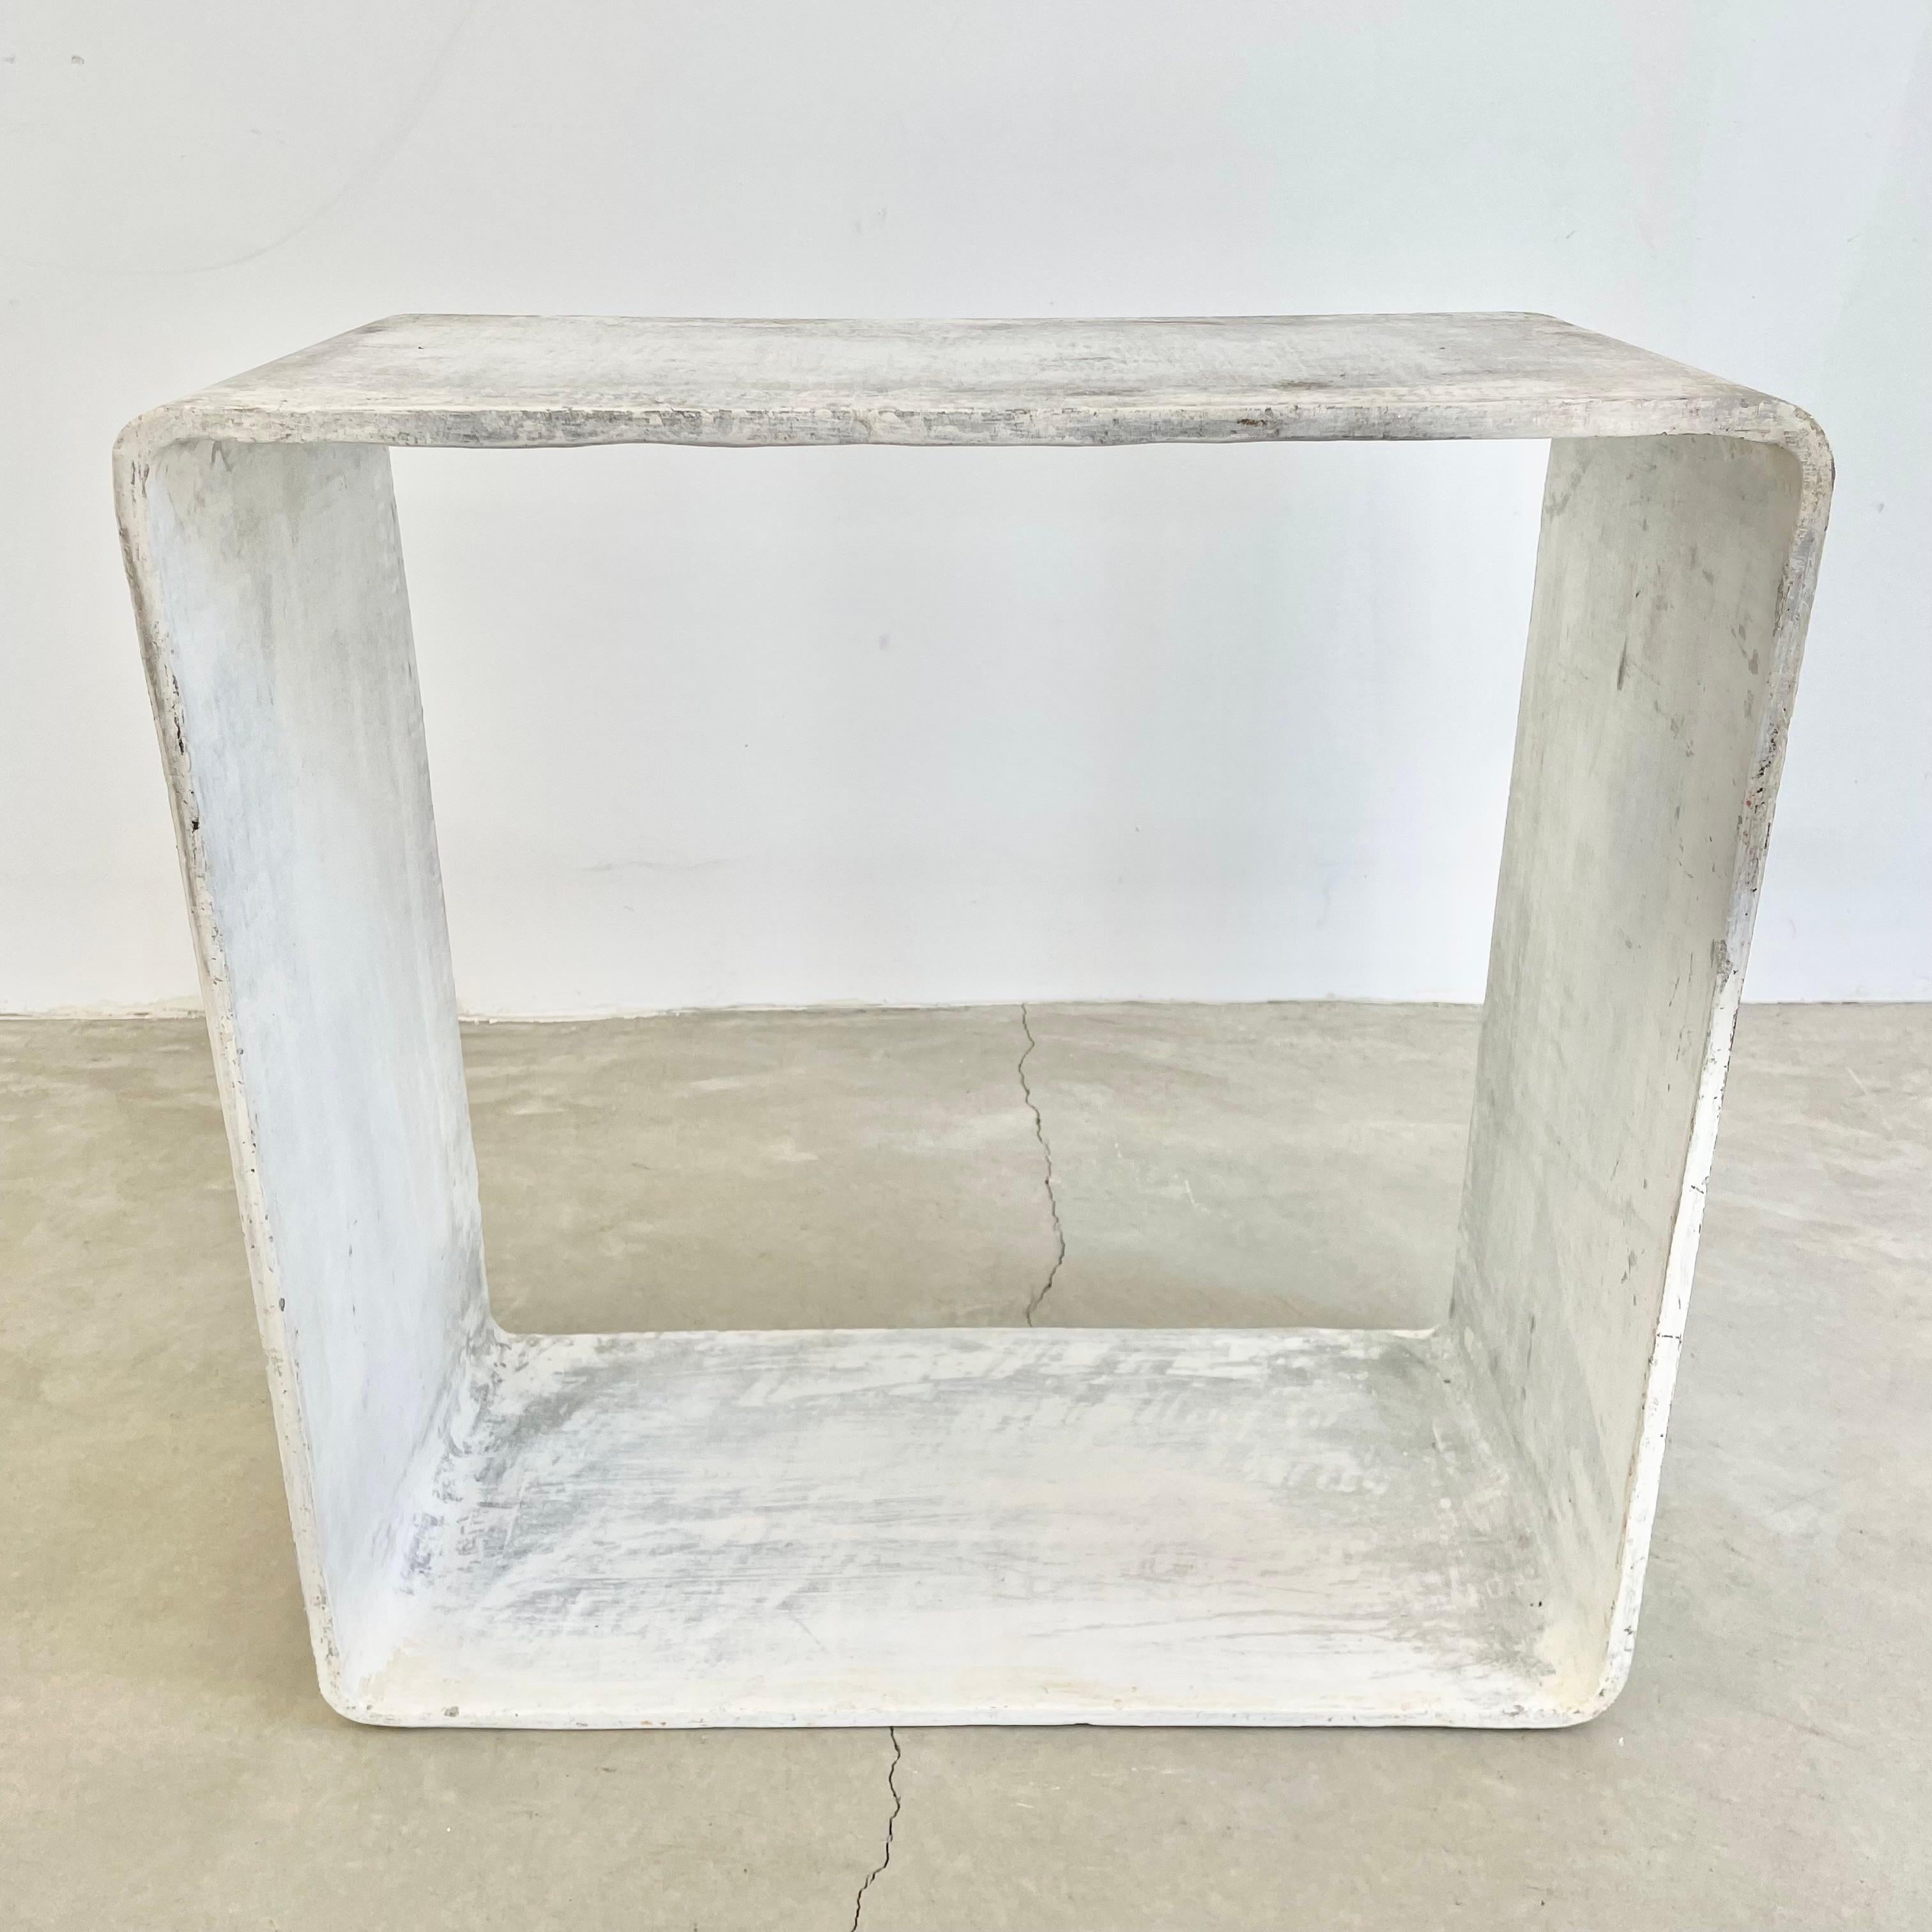 Willy Guhl Concrete Cube Side Table, 1960s Switzerland For Sale 5